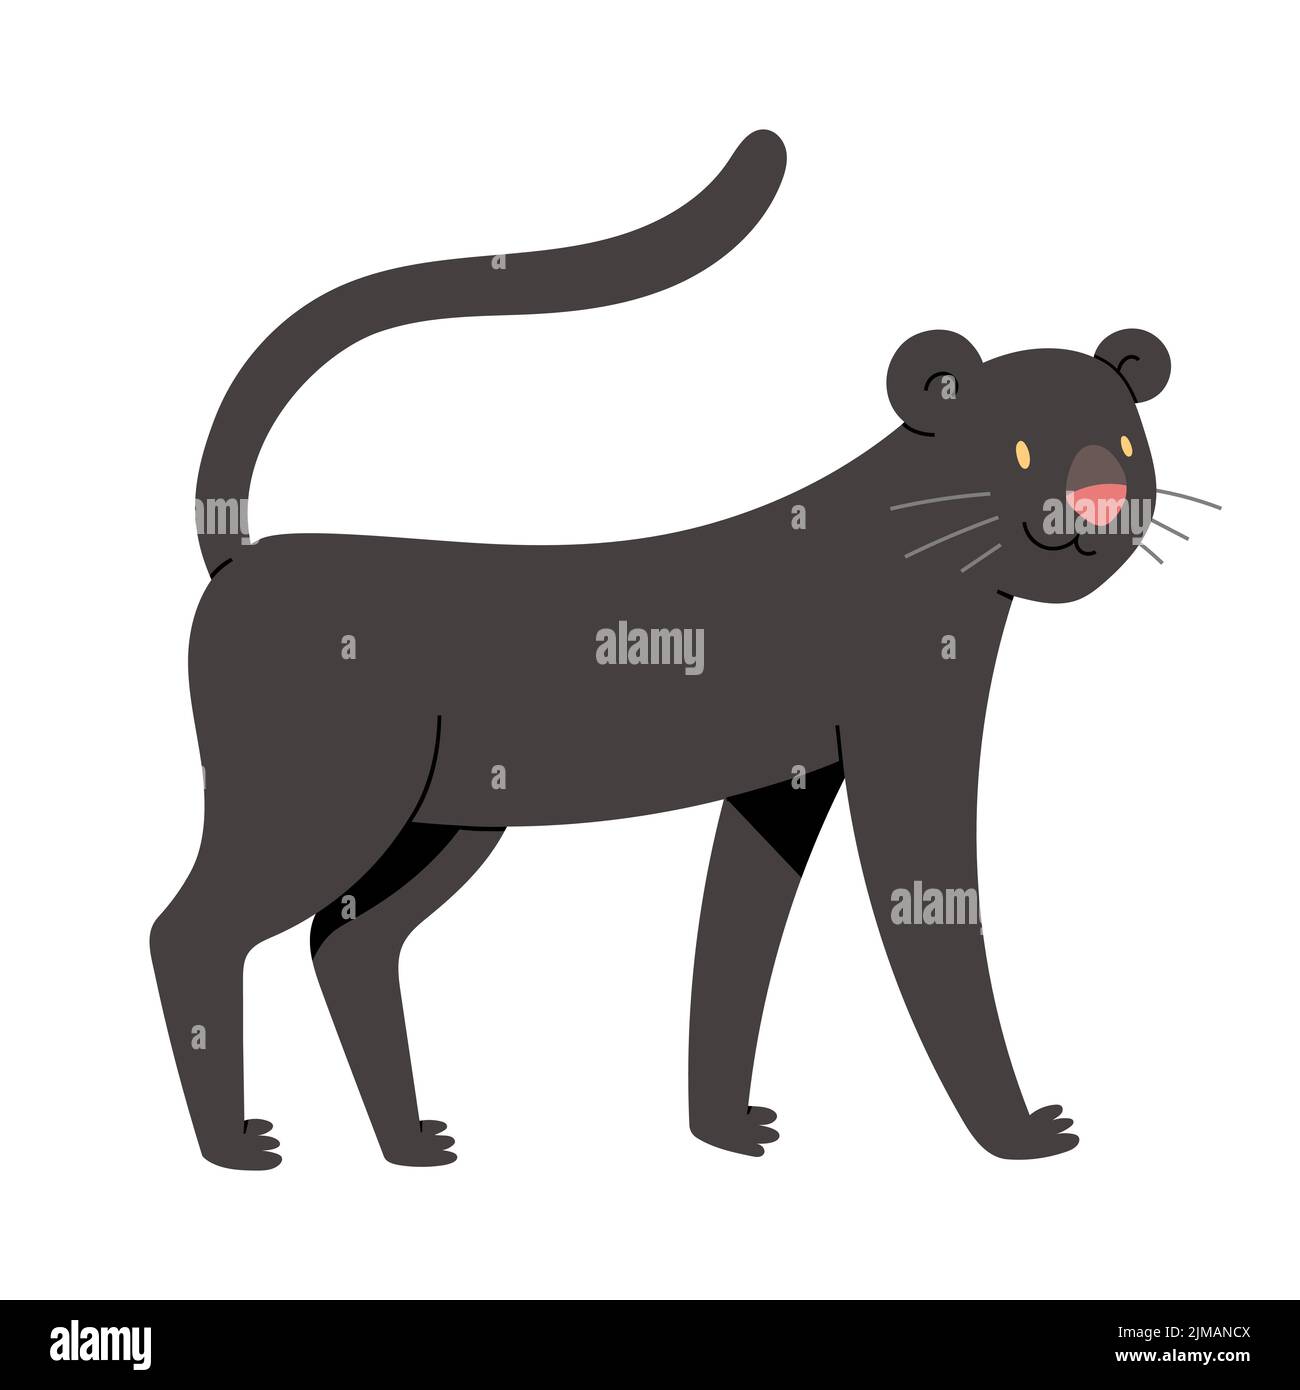 Cute panther character, big cat illustration, black jaguar with smiling face expression, jungle feline, vector illustration isolated on white Stock Vector